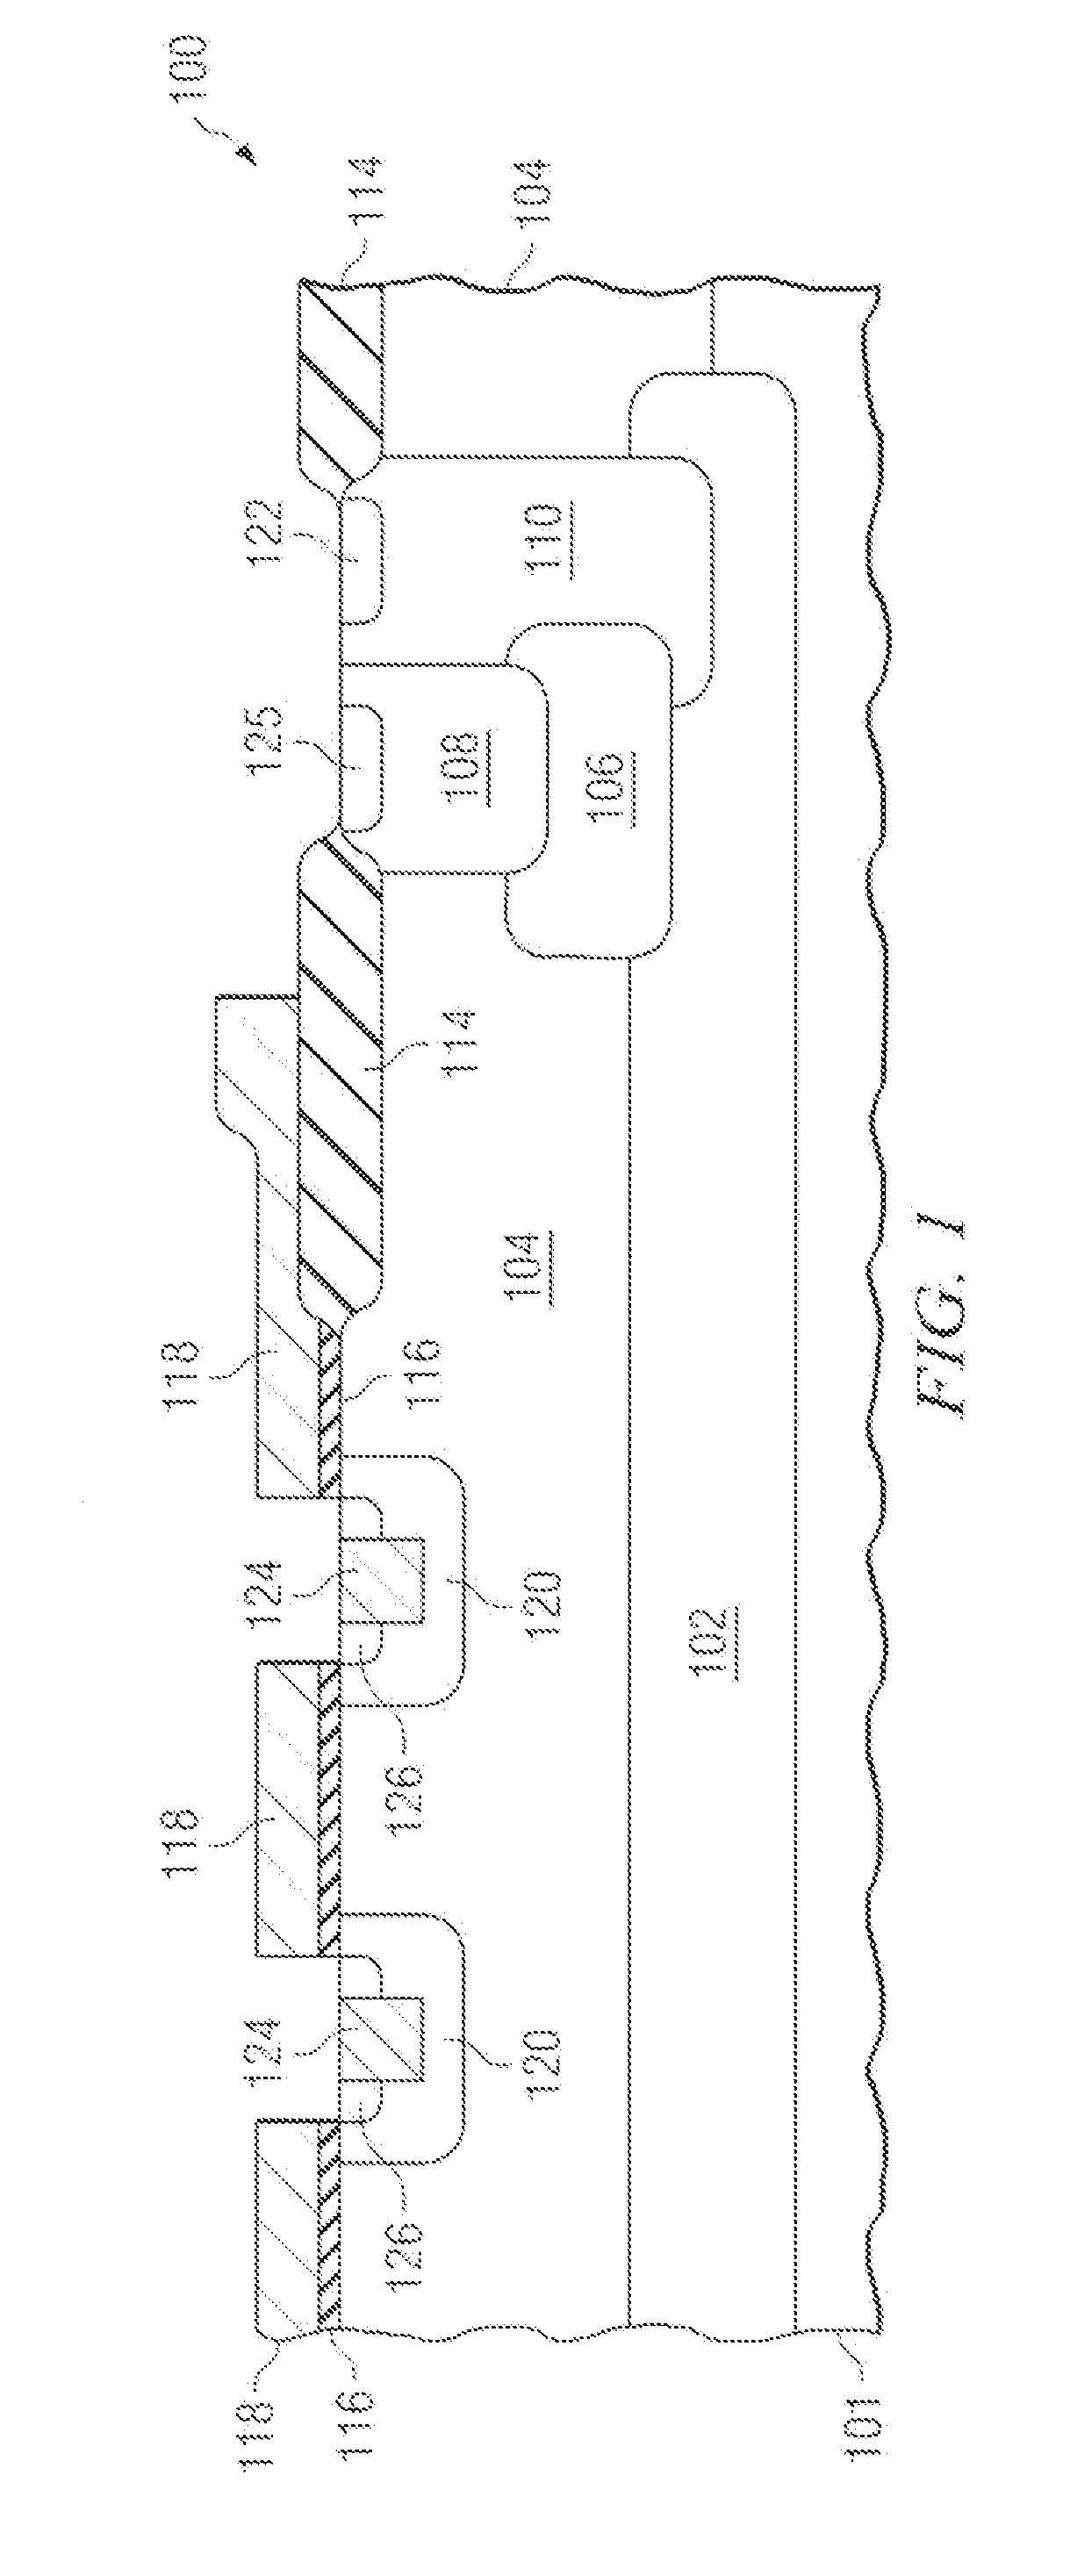 Quasi-vertical gated NPN-PNP ESD protection device